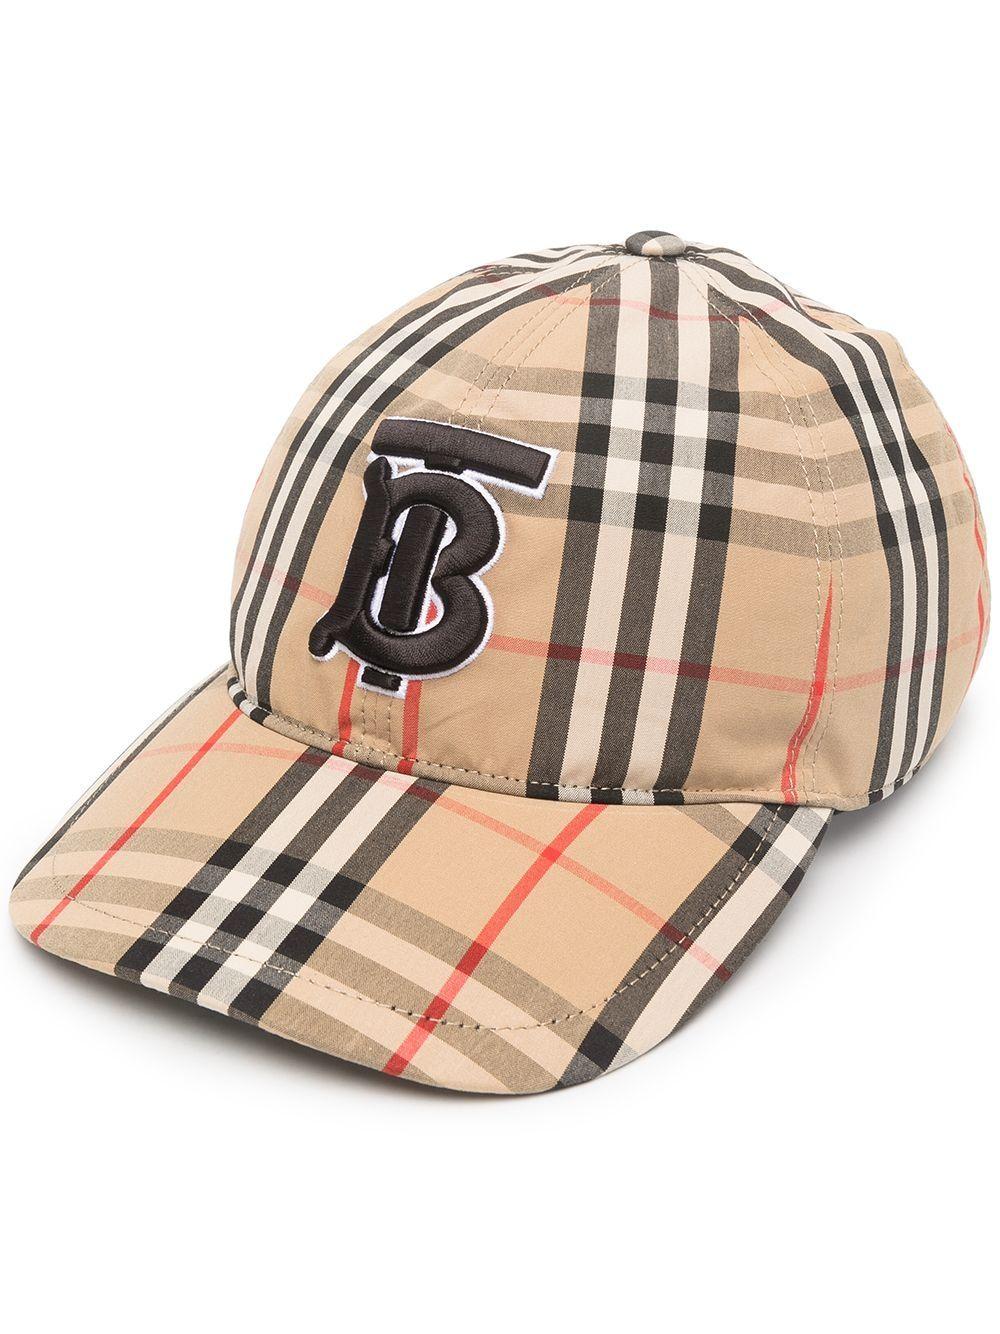 Burberry Check Tb Baseball Cap in Natural | Lyst